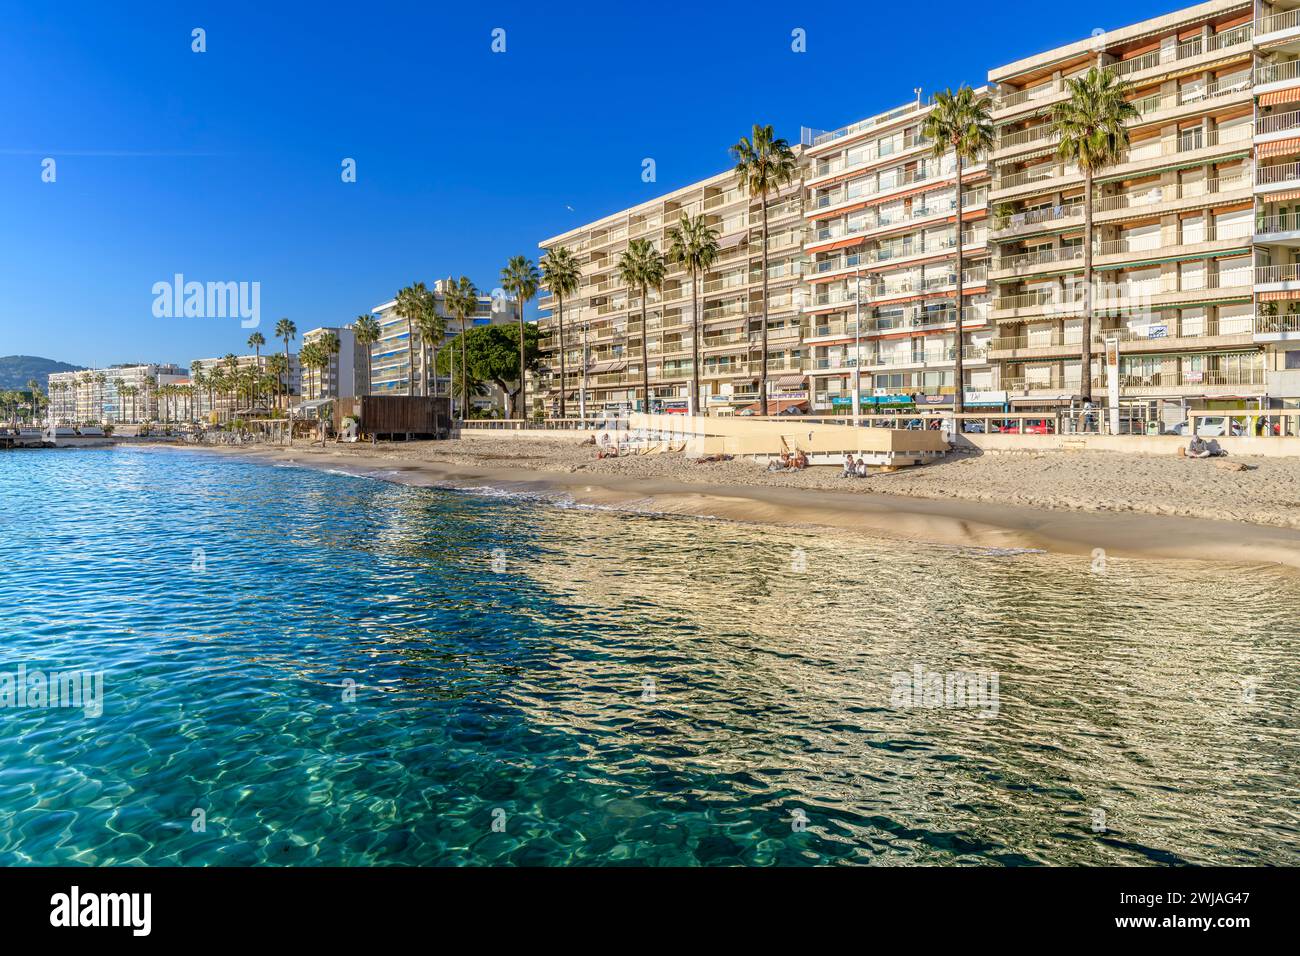 The seafront promenade and smart apartments of Juan Les Pins Beach in Antibes on the French Riviera, Côte d'Azur, France in November! Stock Photo